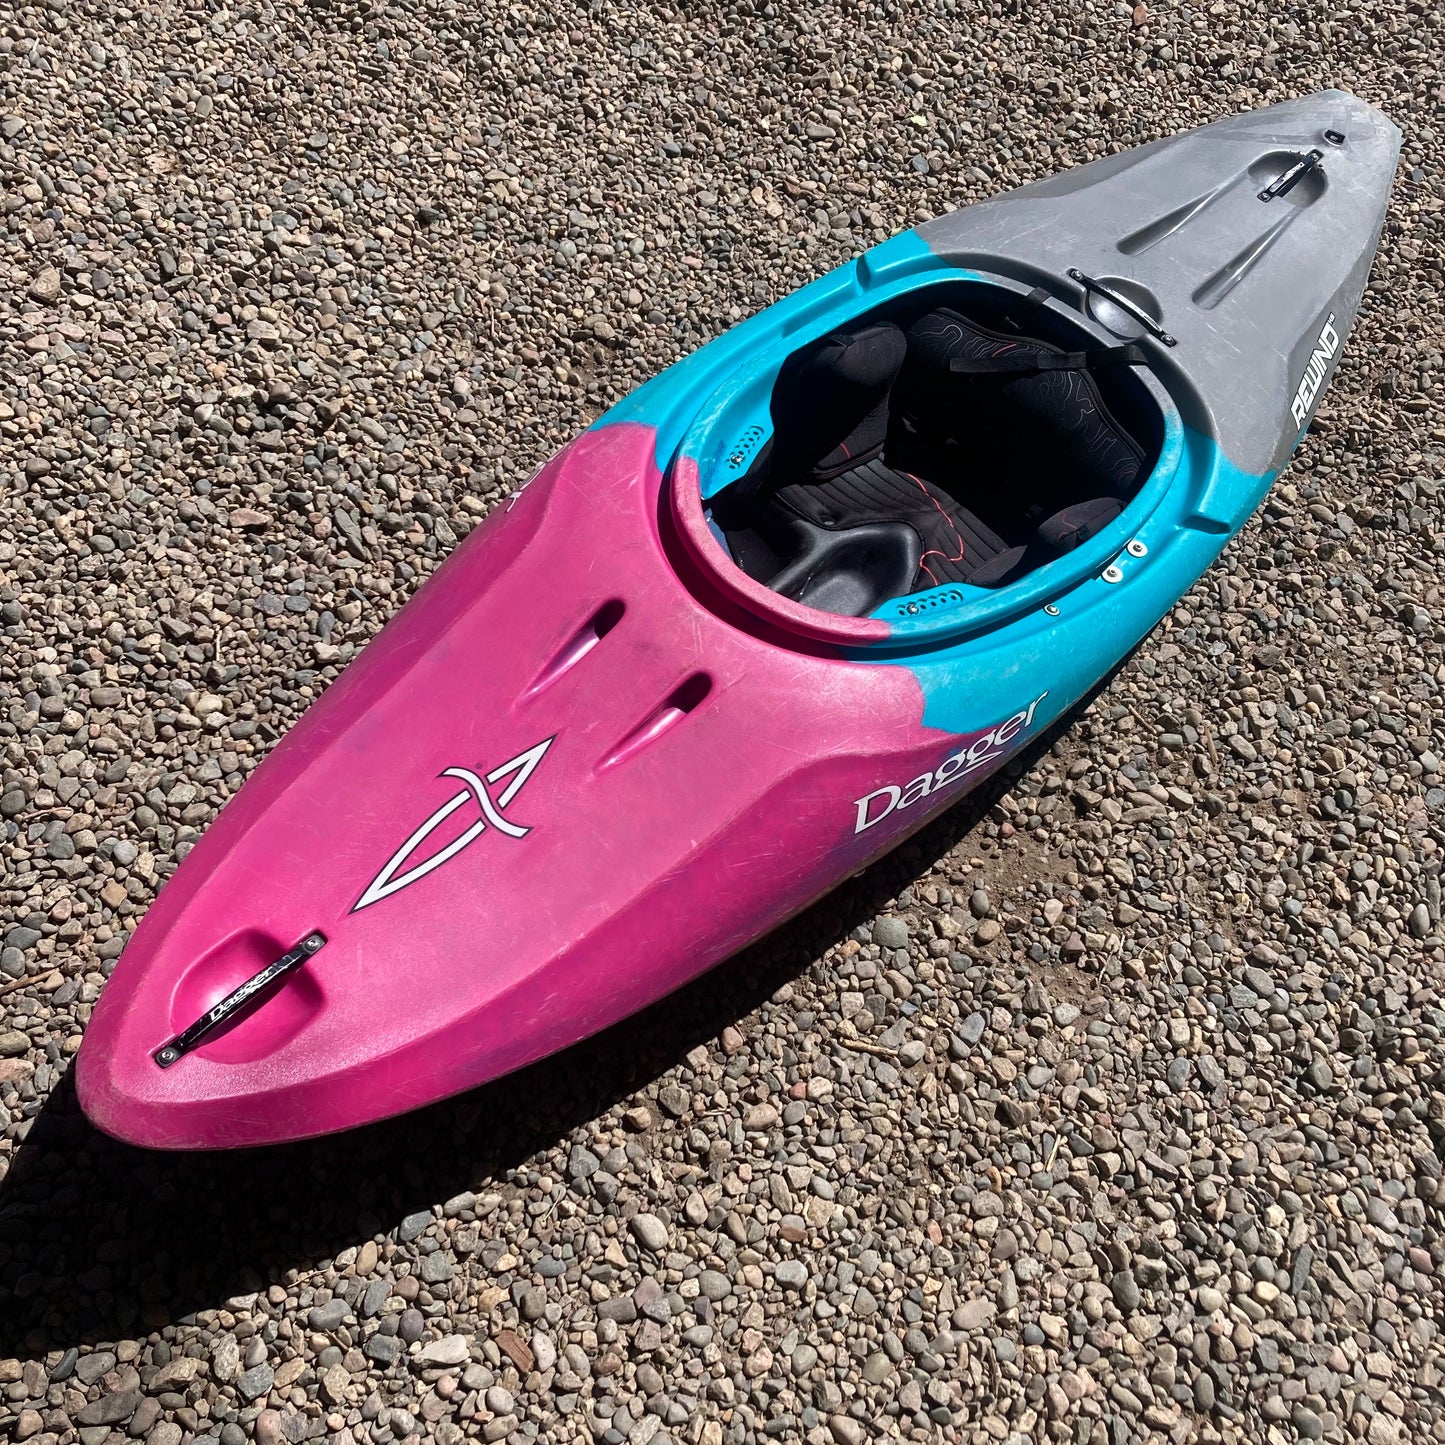 A pink and blue Dagger Demo Rewind XS kayak laying on the ground.